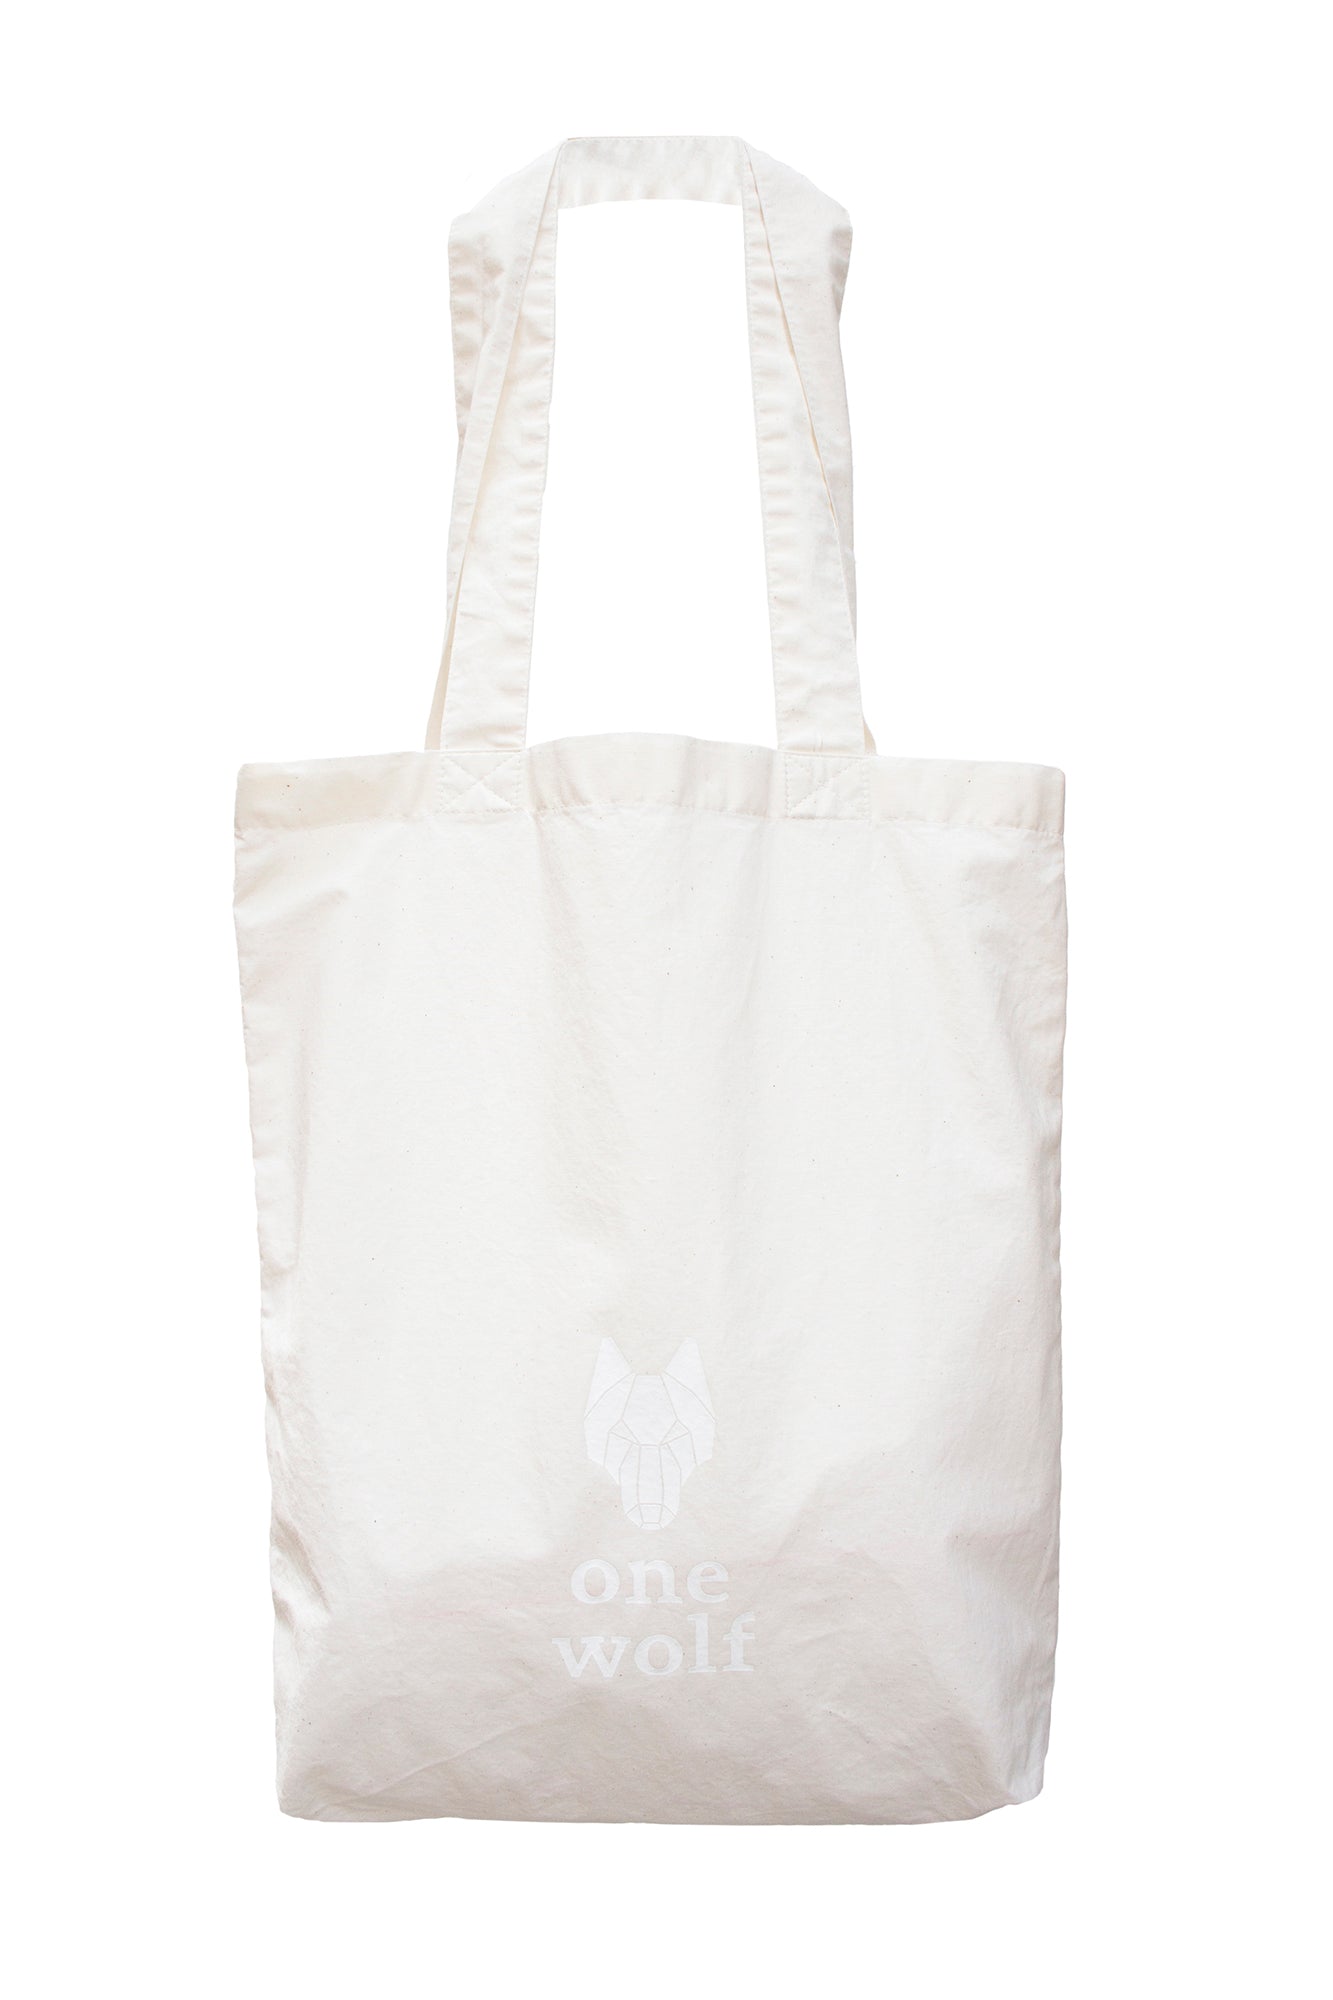 One Wolf Tote Bag - Beige (Large)